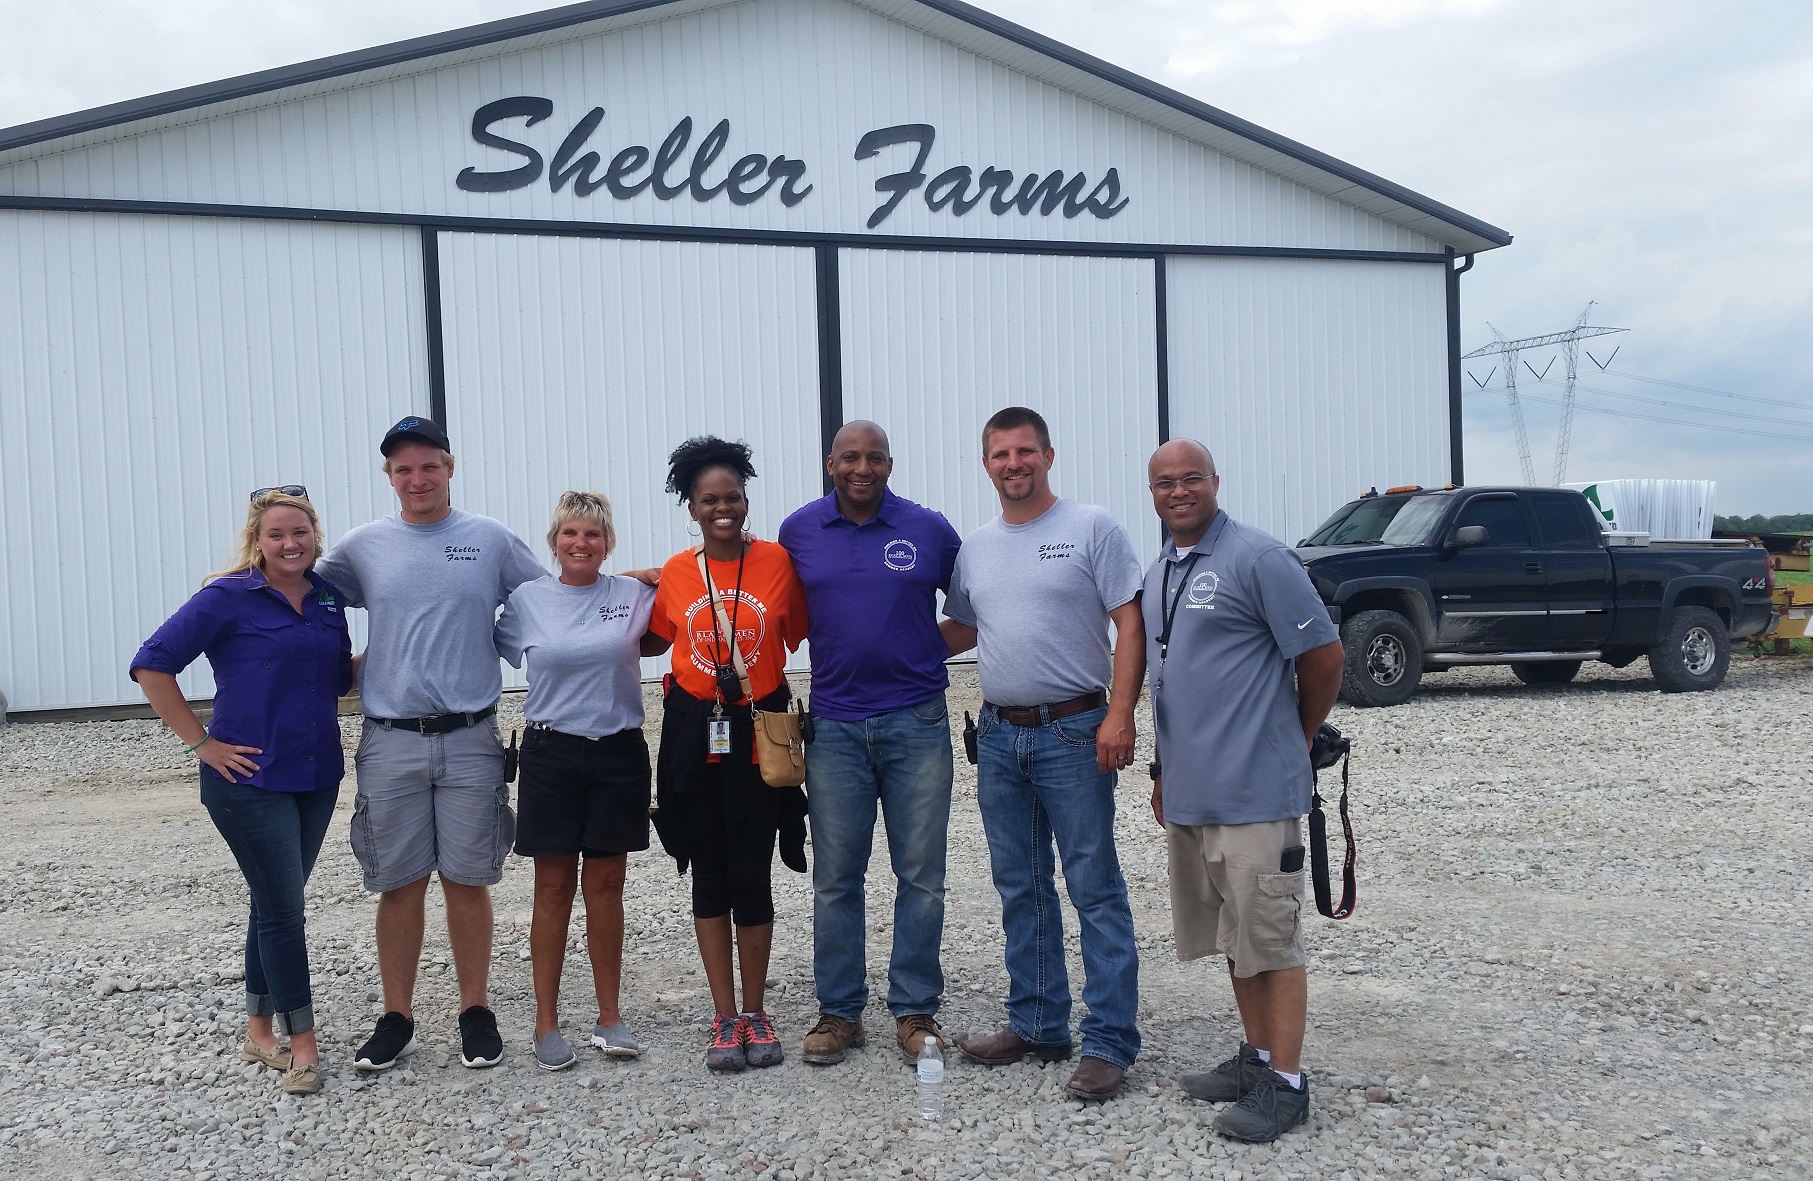 people standing in front of Sheller Farms